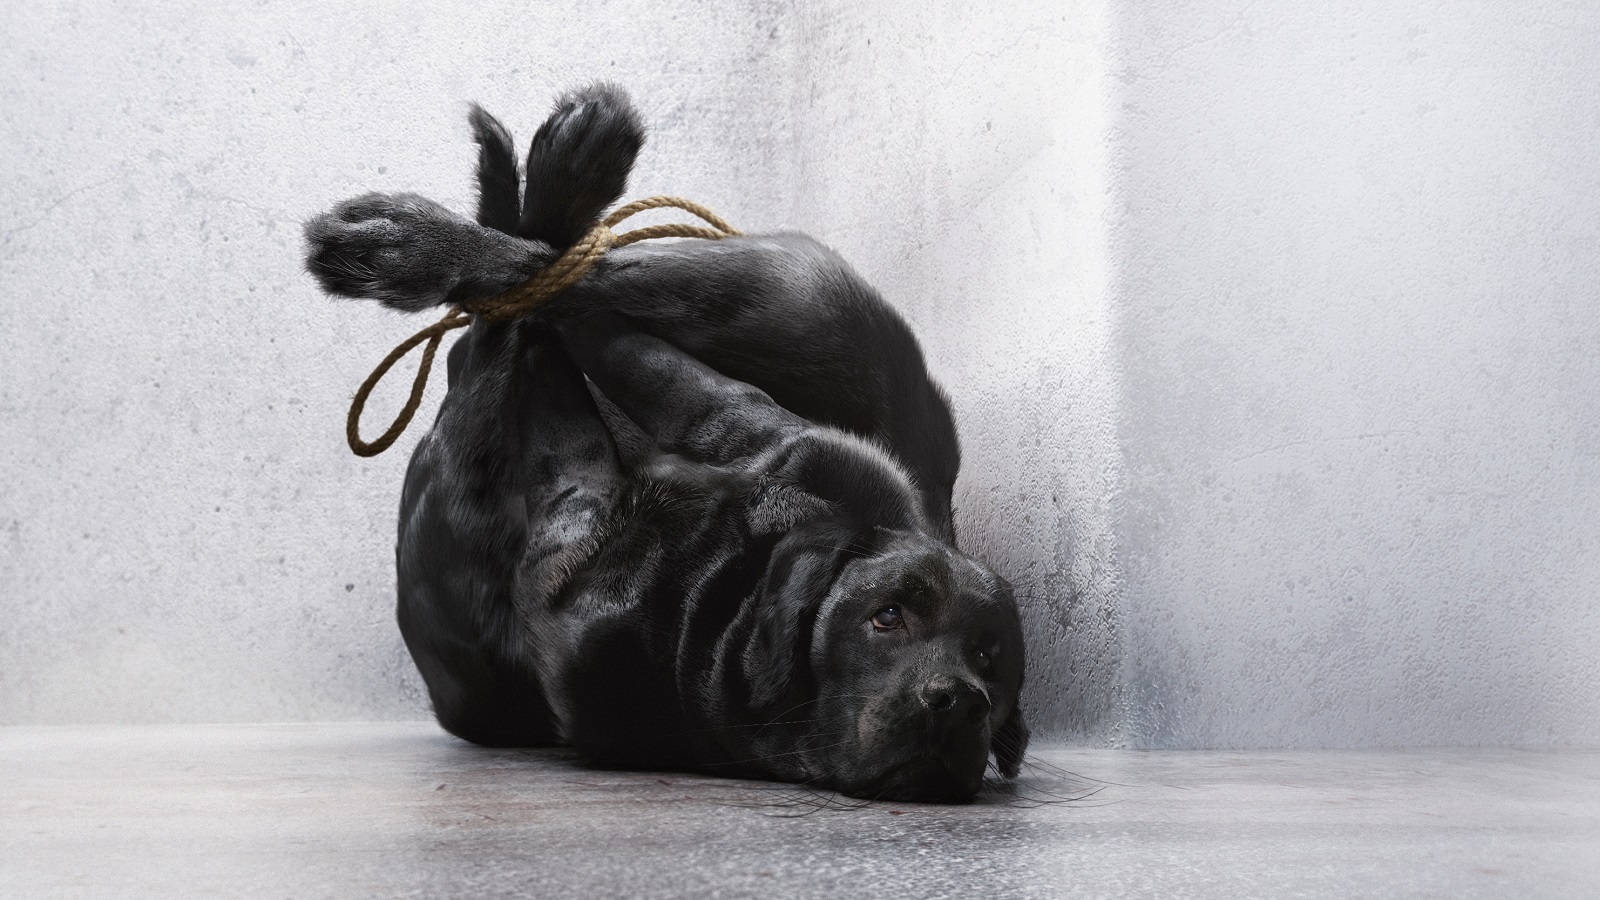 Startling Animal Welfare Campaign Shows Pets as Garbage Bags